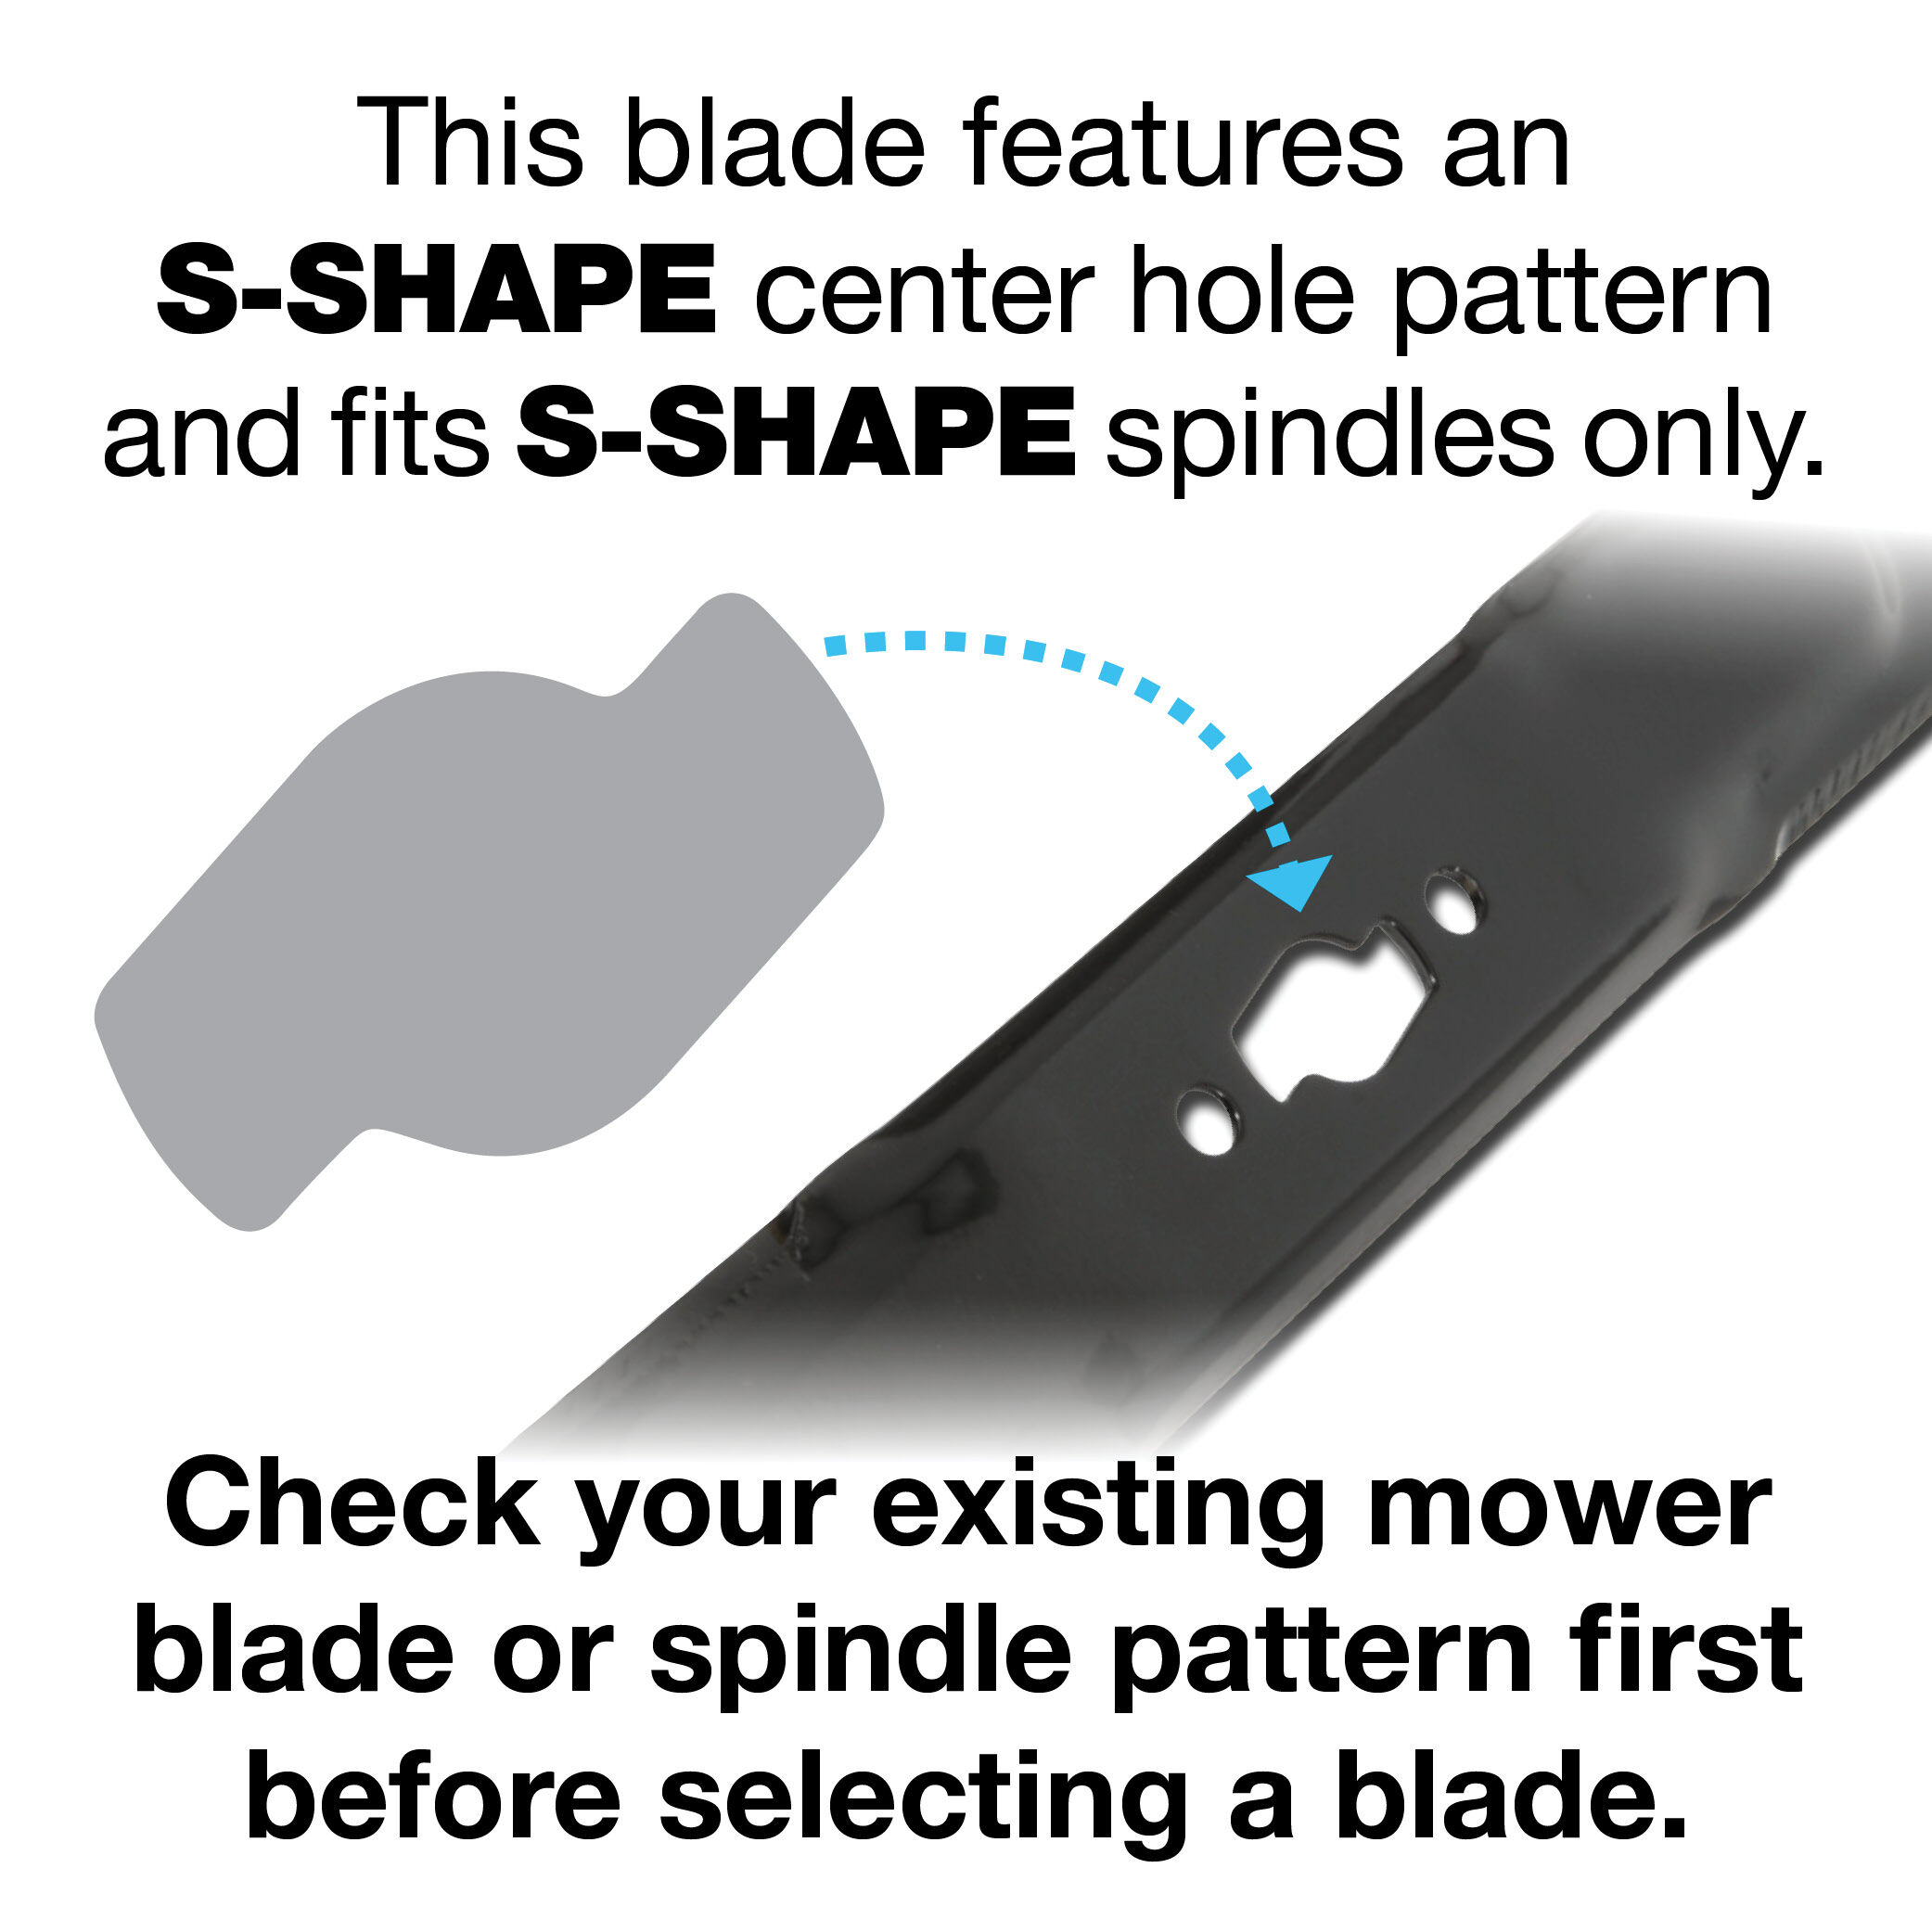 3-in-1 Blade for 21-inch Cutting Decks - 742P05642 | MTD Parts